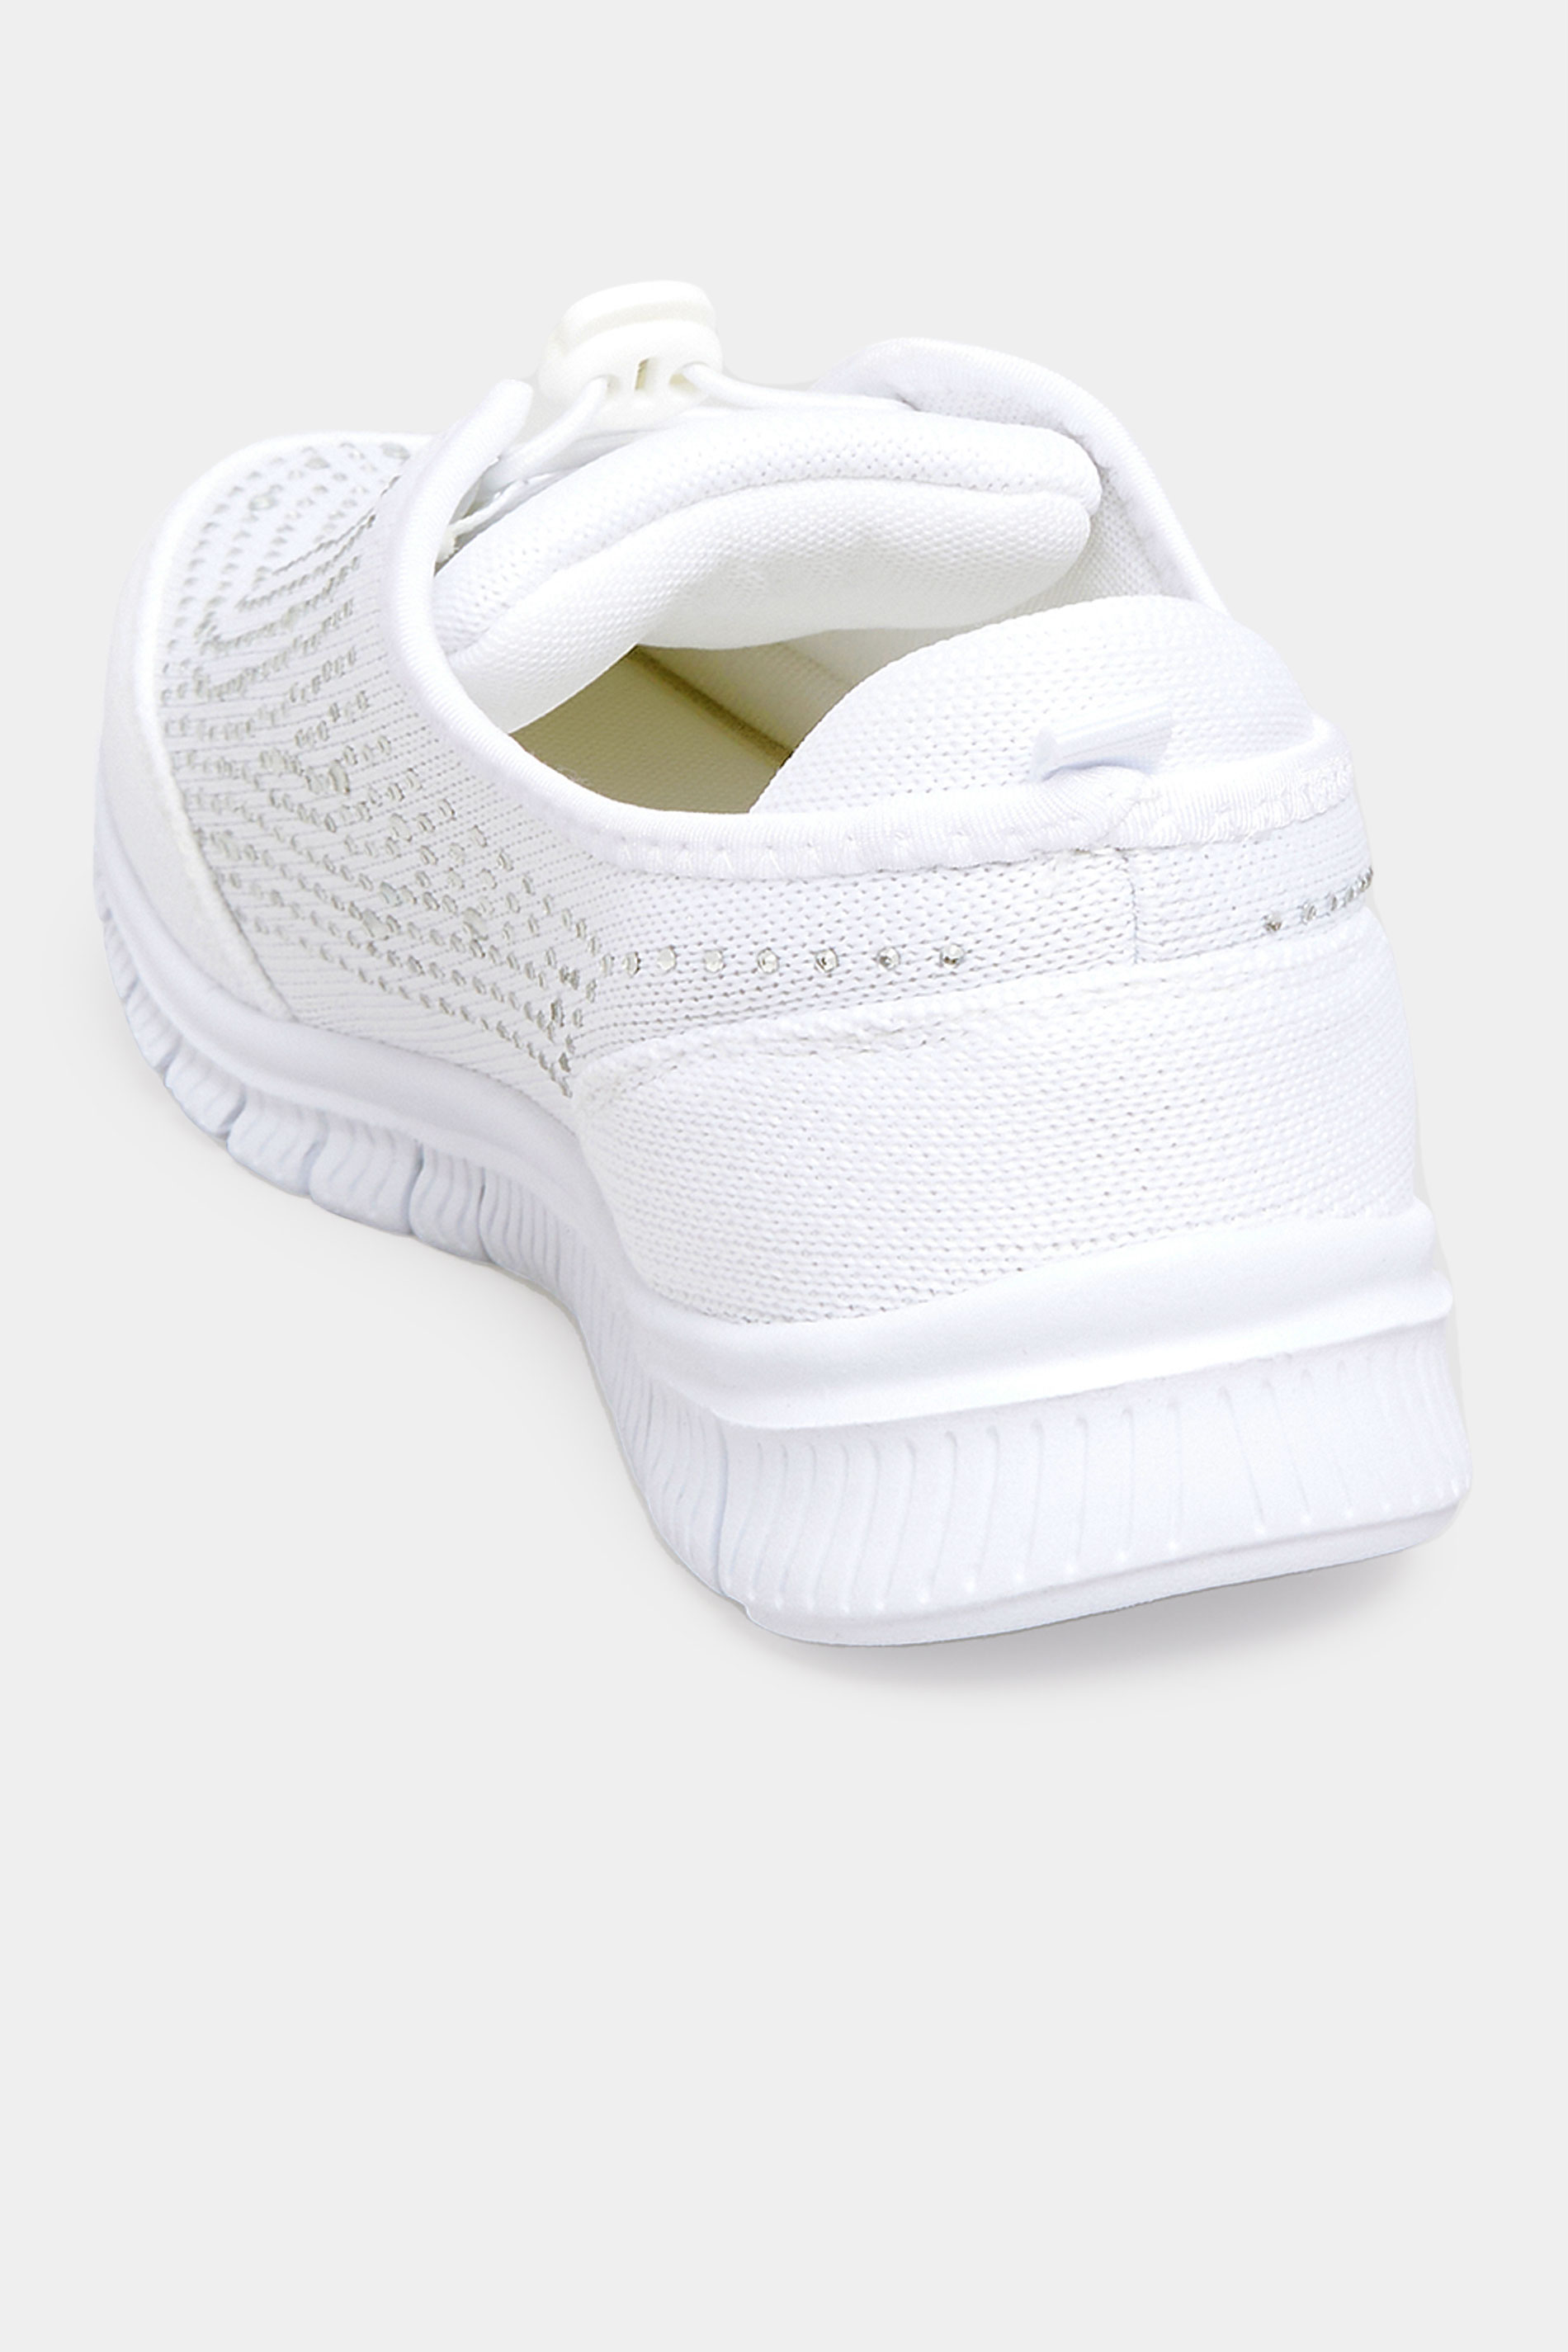 Chaussures Pieds Larges Tennis & Baskets Pieds Larges | Baskets Blanches Empiècement Strass Pieds Larges EEE - SK60595